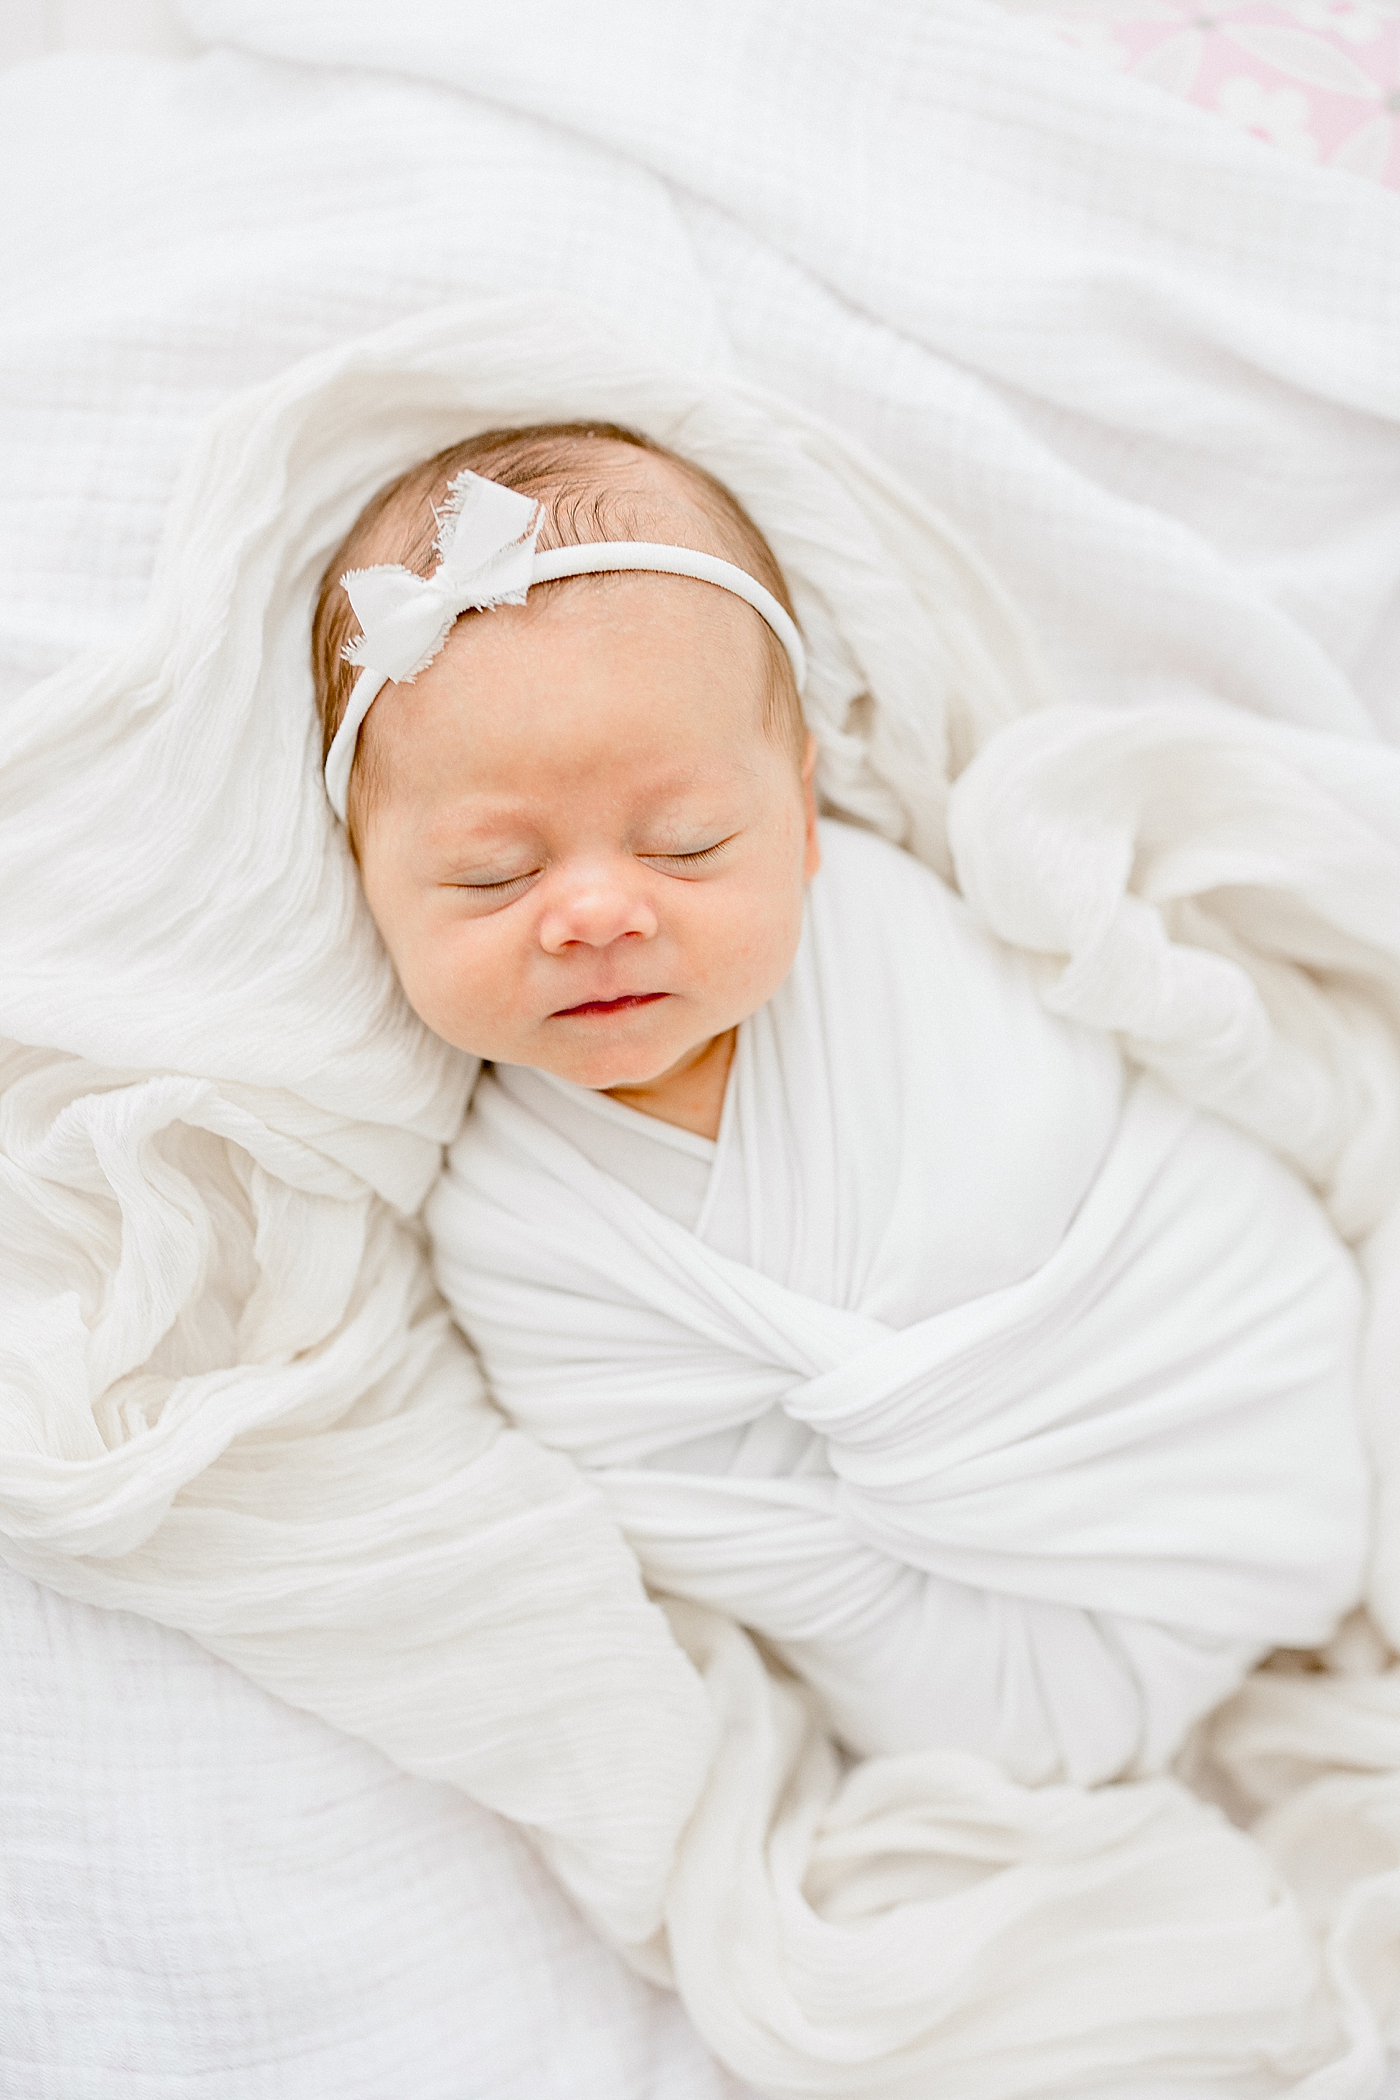 Baby girl swaddled in all white. Photo by Brittany Elise Photography.